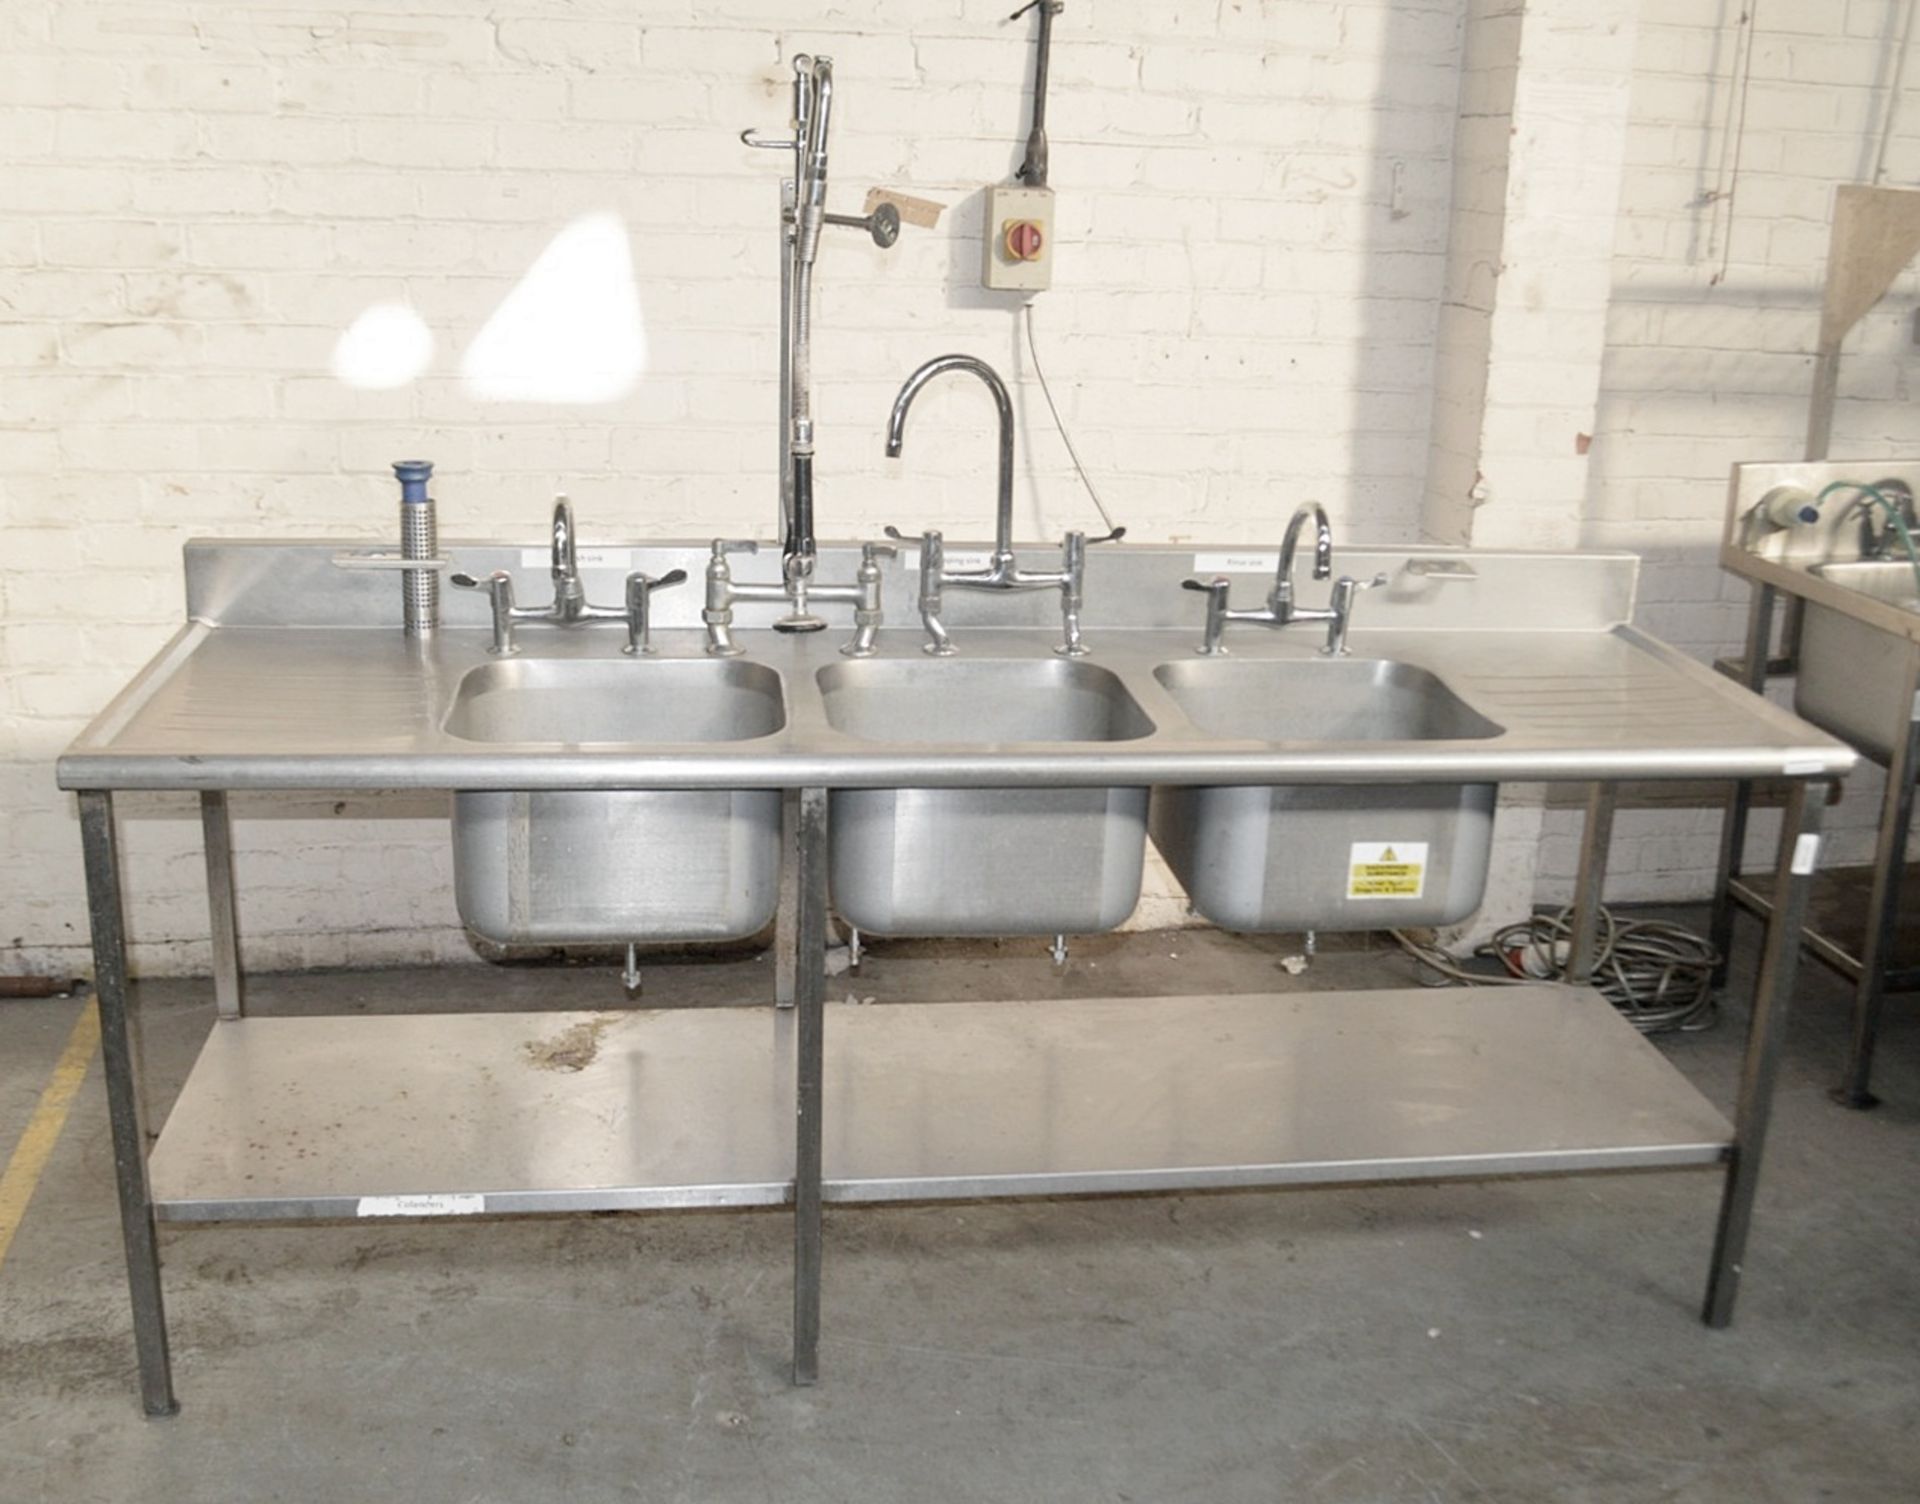 1 x Stainless Steel Commercial Kitchen Triple Pot Wash Sink Unit With Spray Arm - Dimensions: H97 - Image 4 of 9